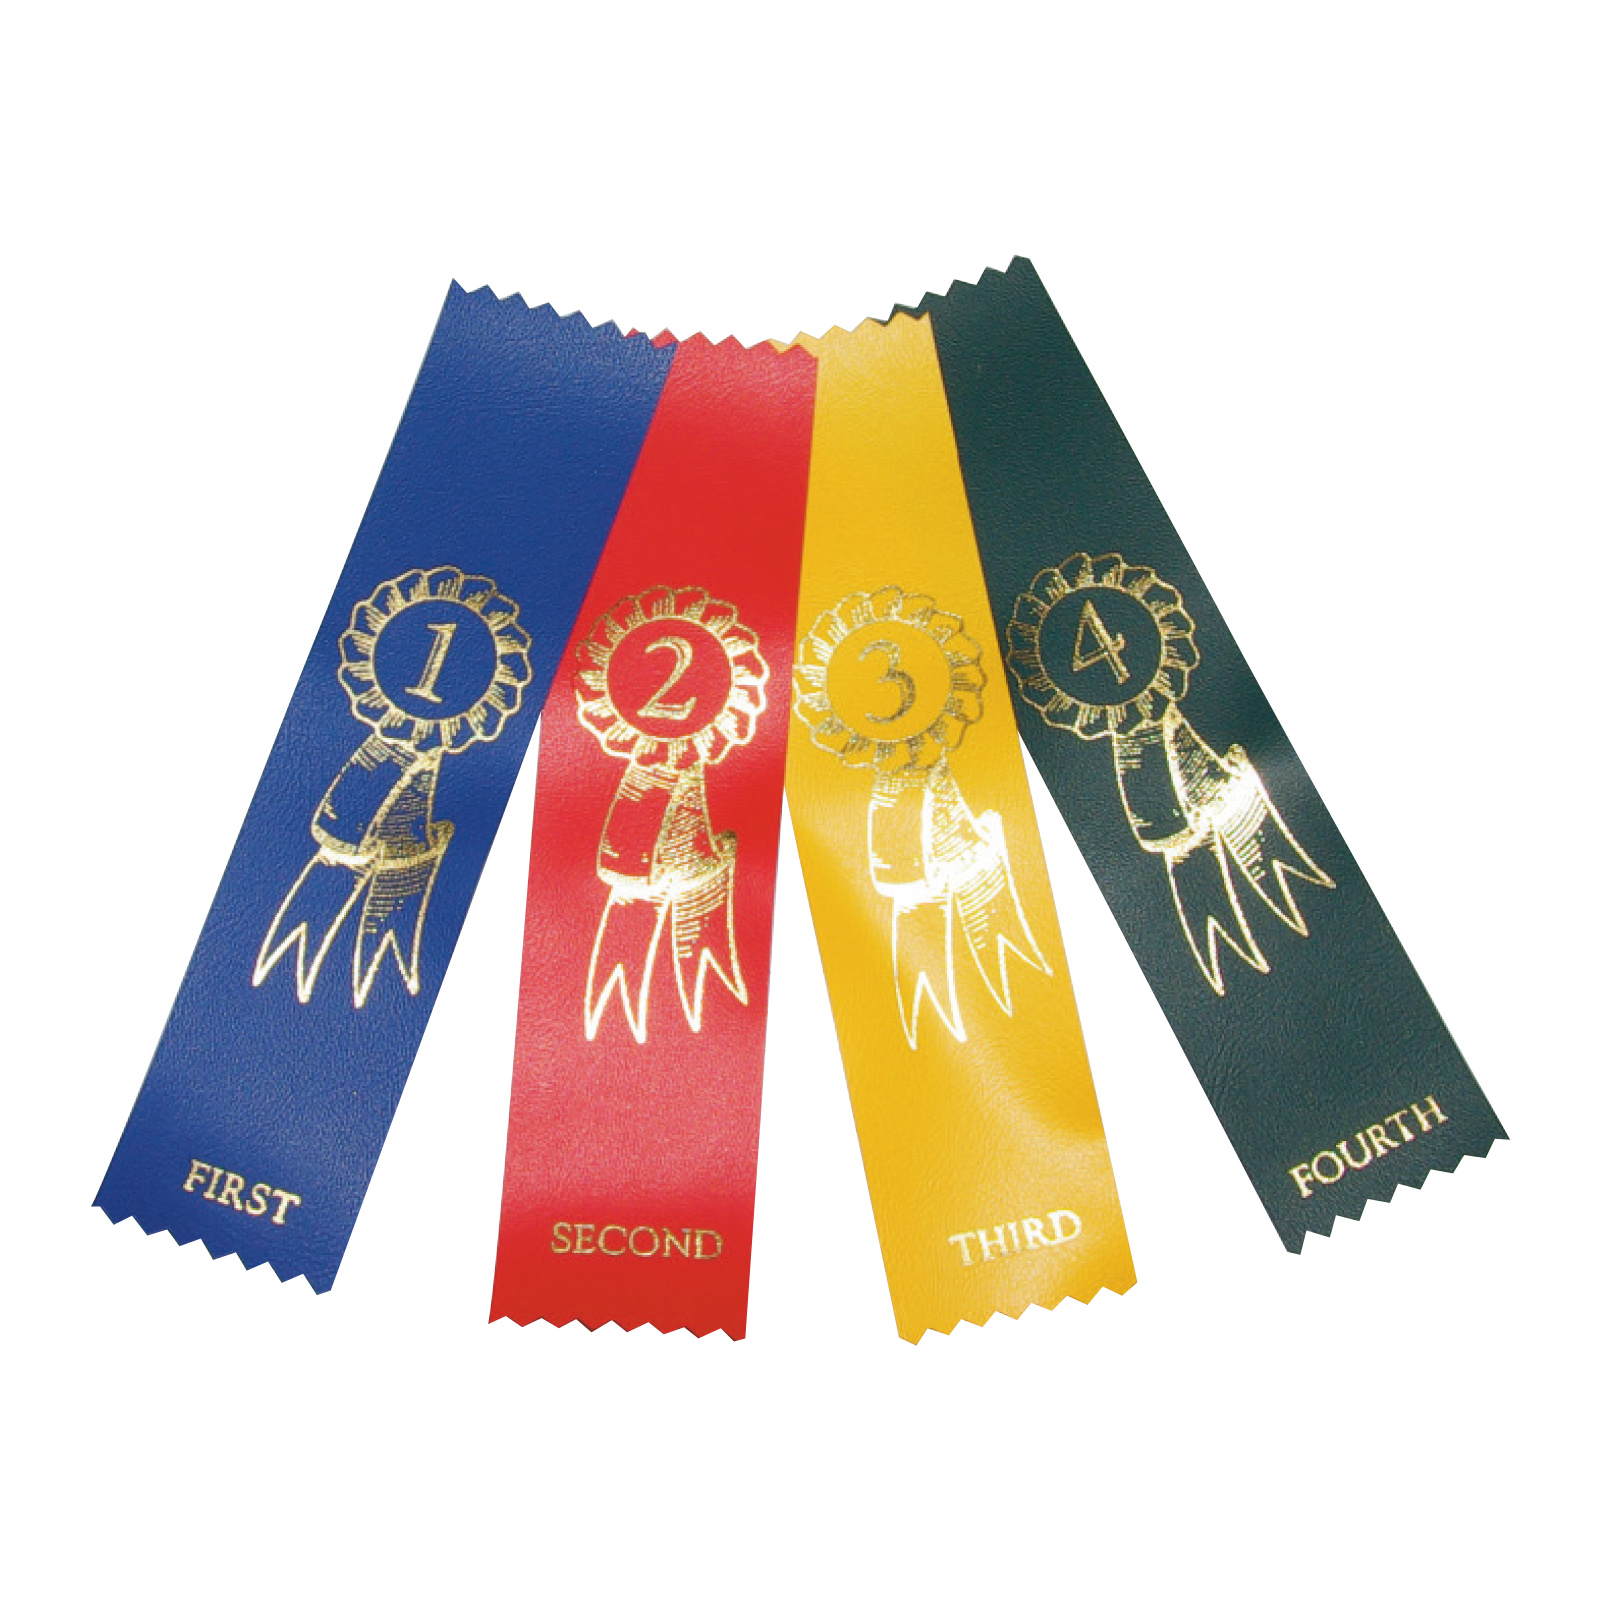 12 Each Place 1st 6th Place Award Ribbons 72 Count Total 